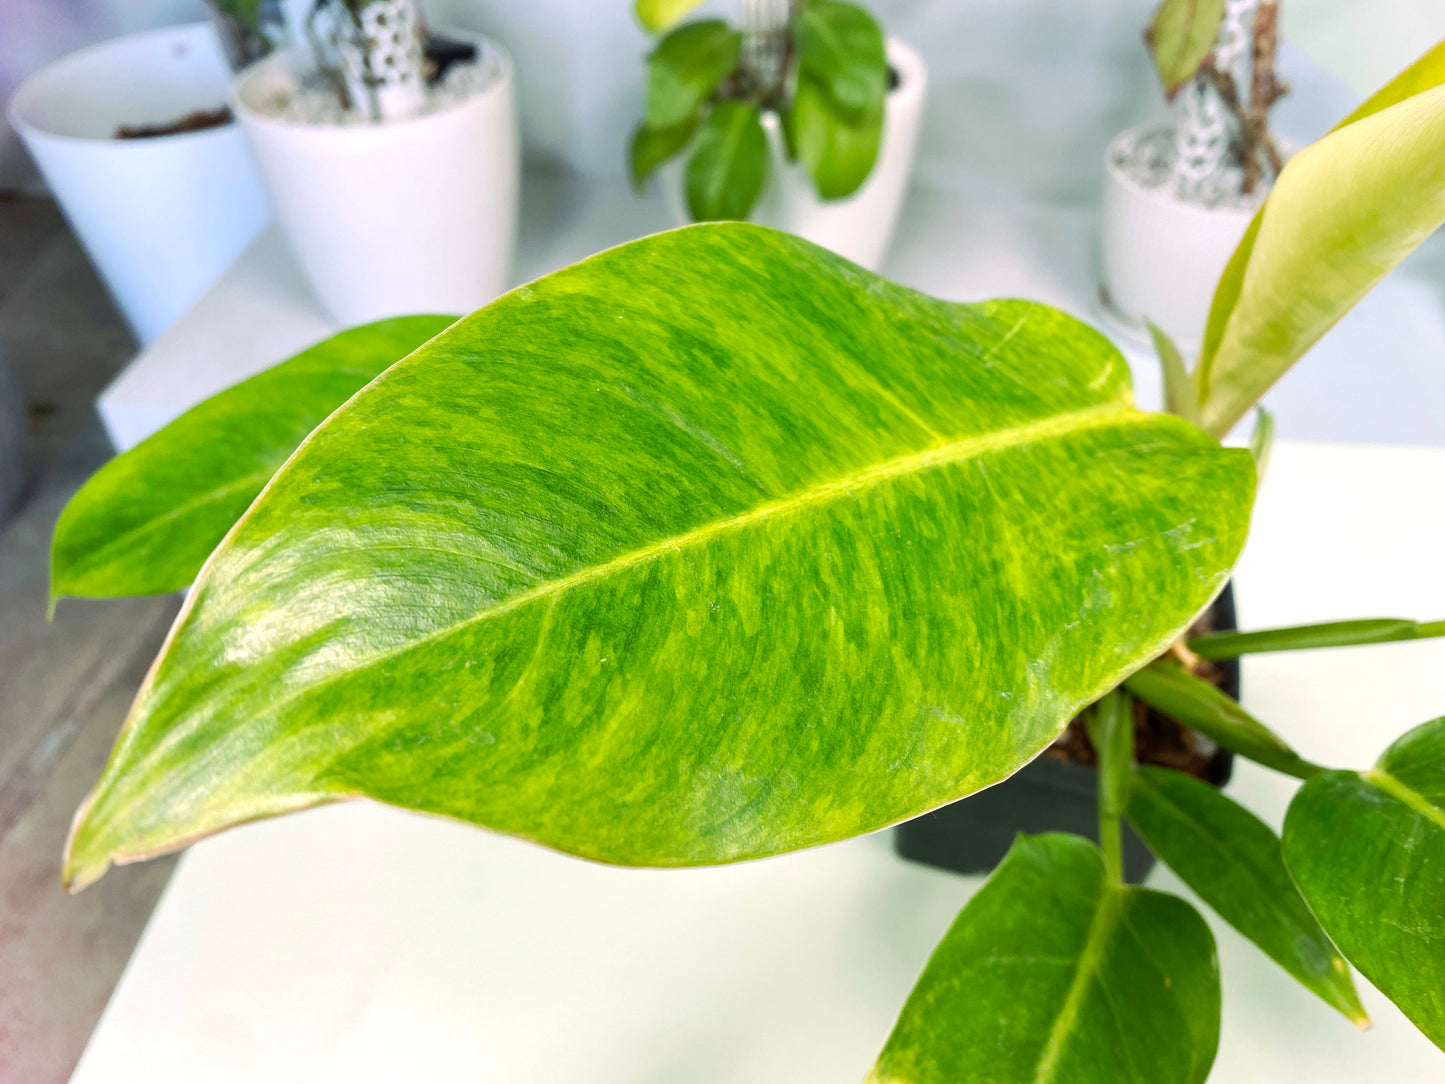 Philodendron "Calkin's Gold" variegated LG (3:M1) [1462] | Exact Plant